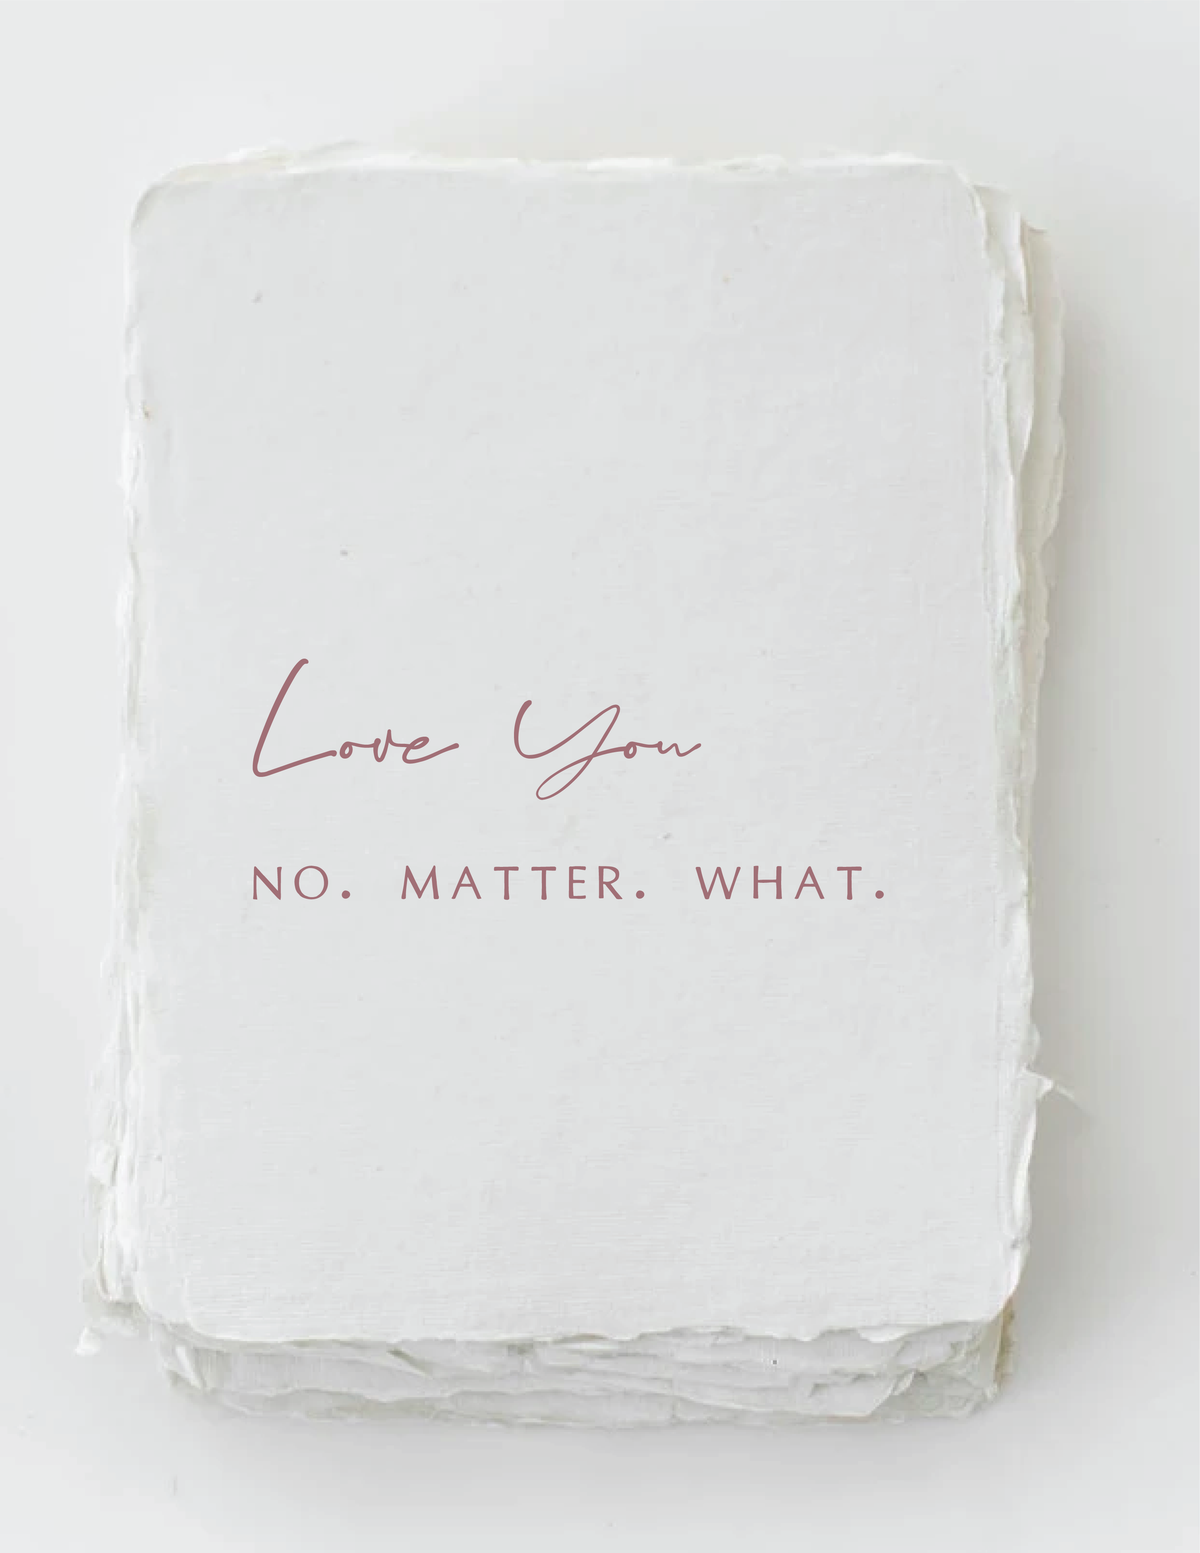 Love you. No. Matter. What. | Card | Flat 1 sided